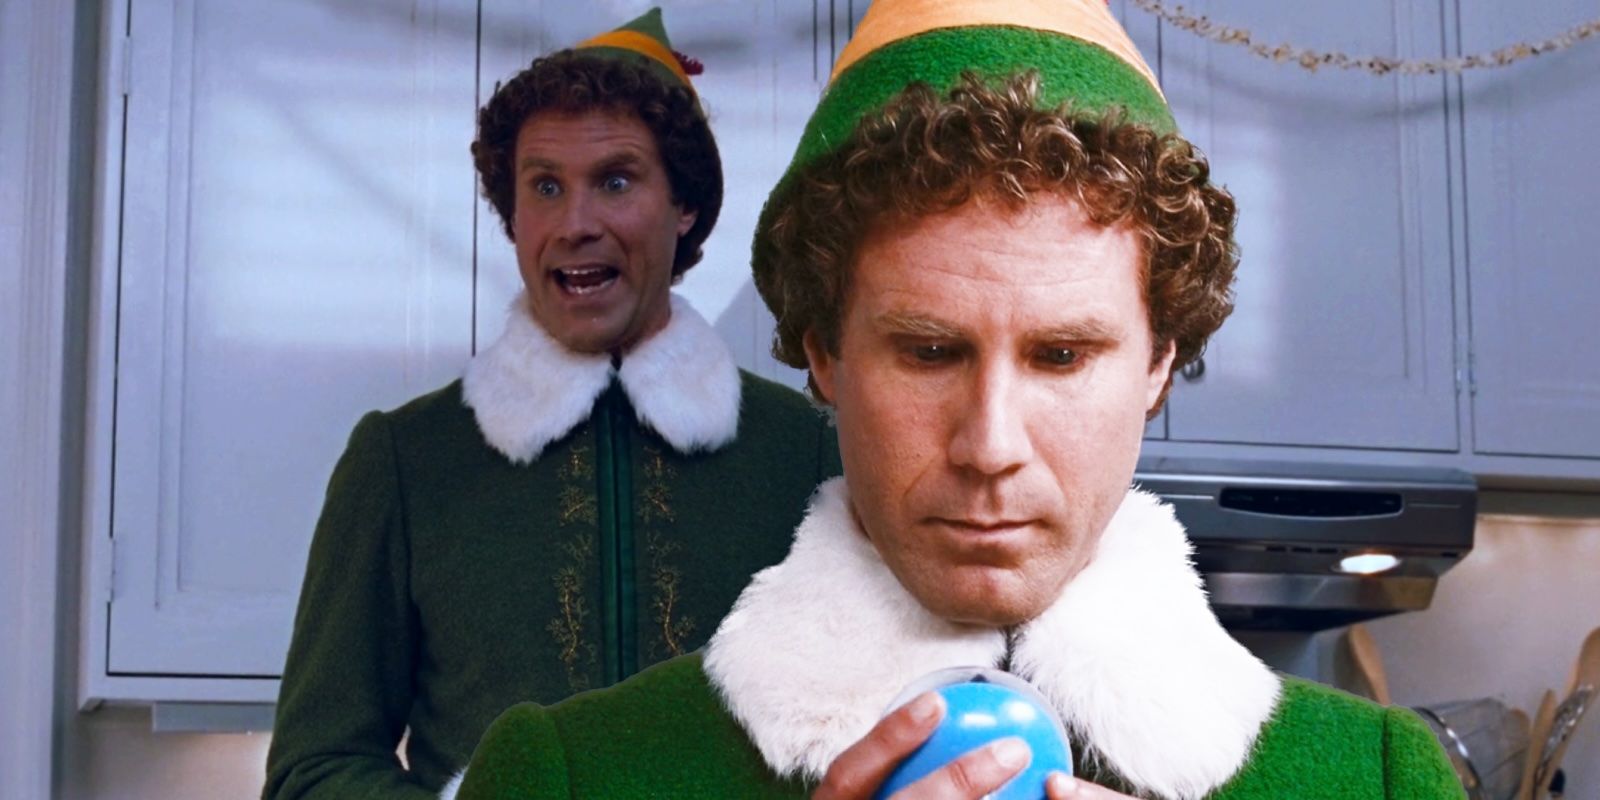 Will Ferrell and Elf inspiration